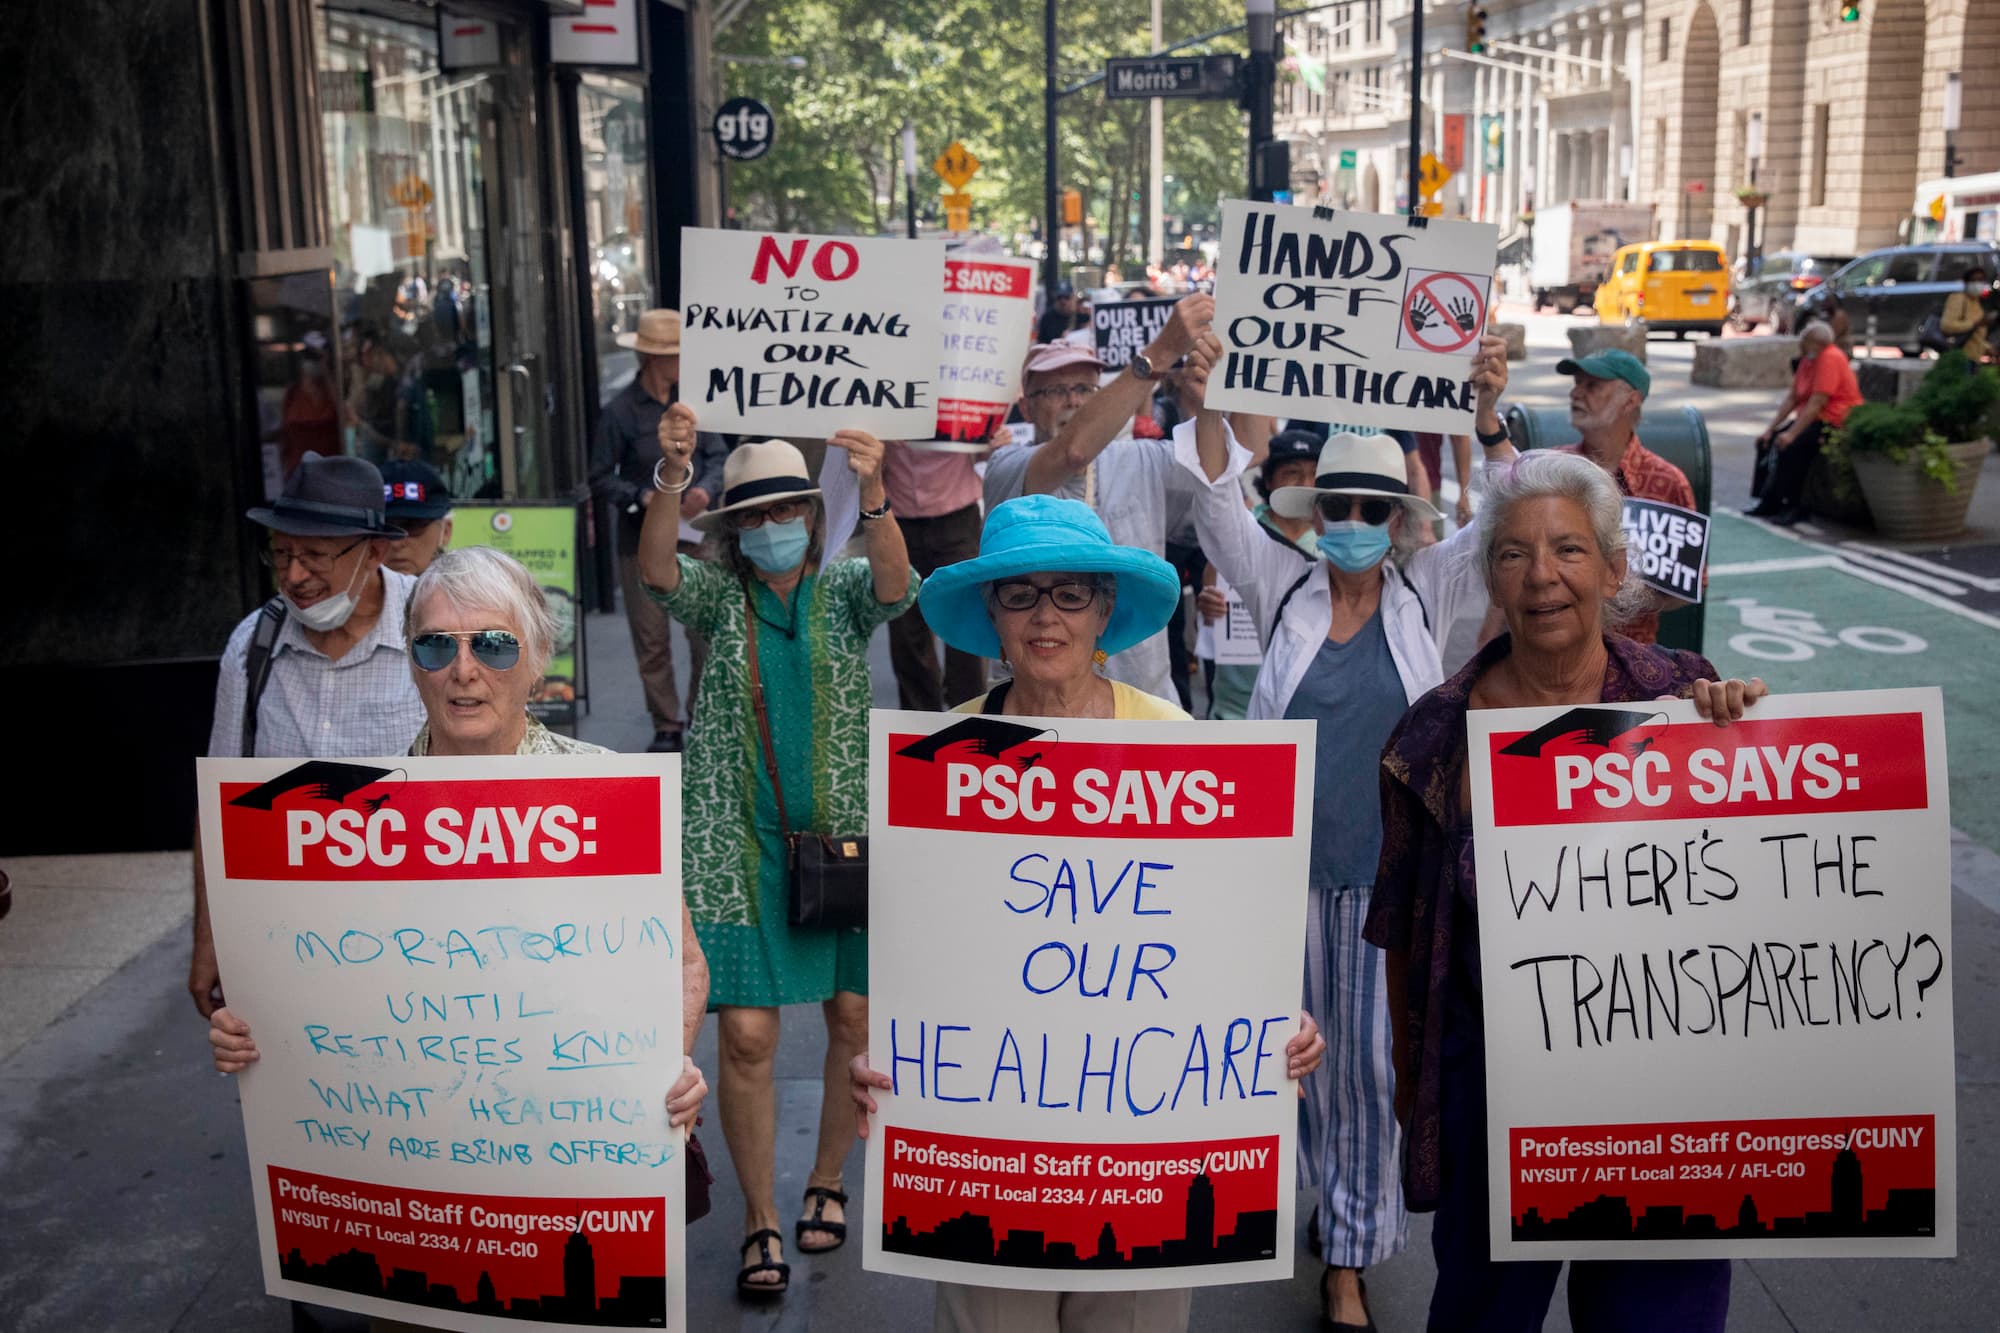 PSC retirees marching to save healthcare 6-30-2021